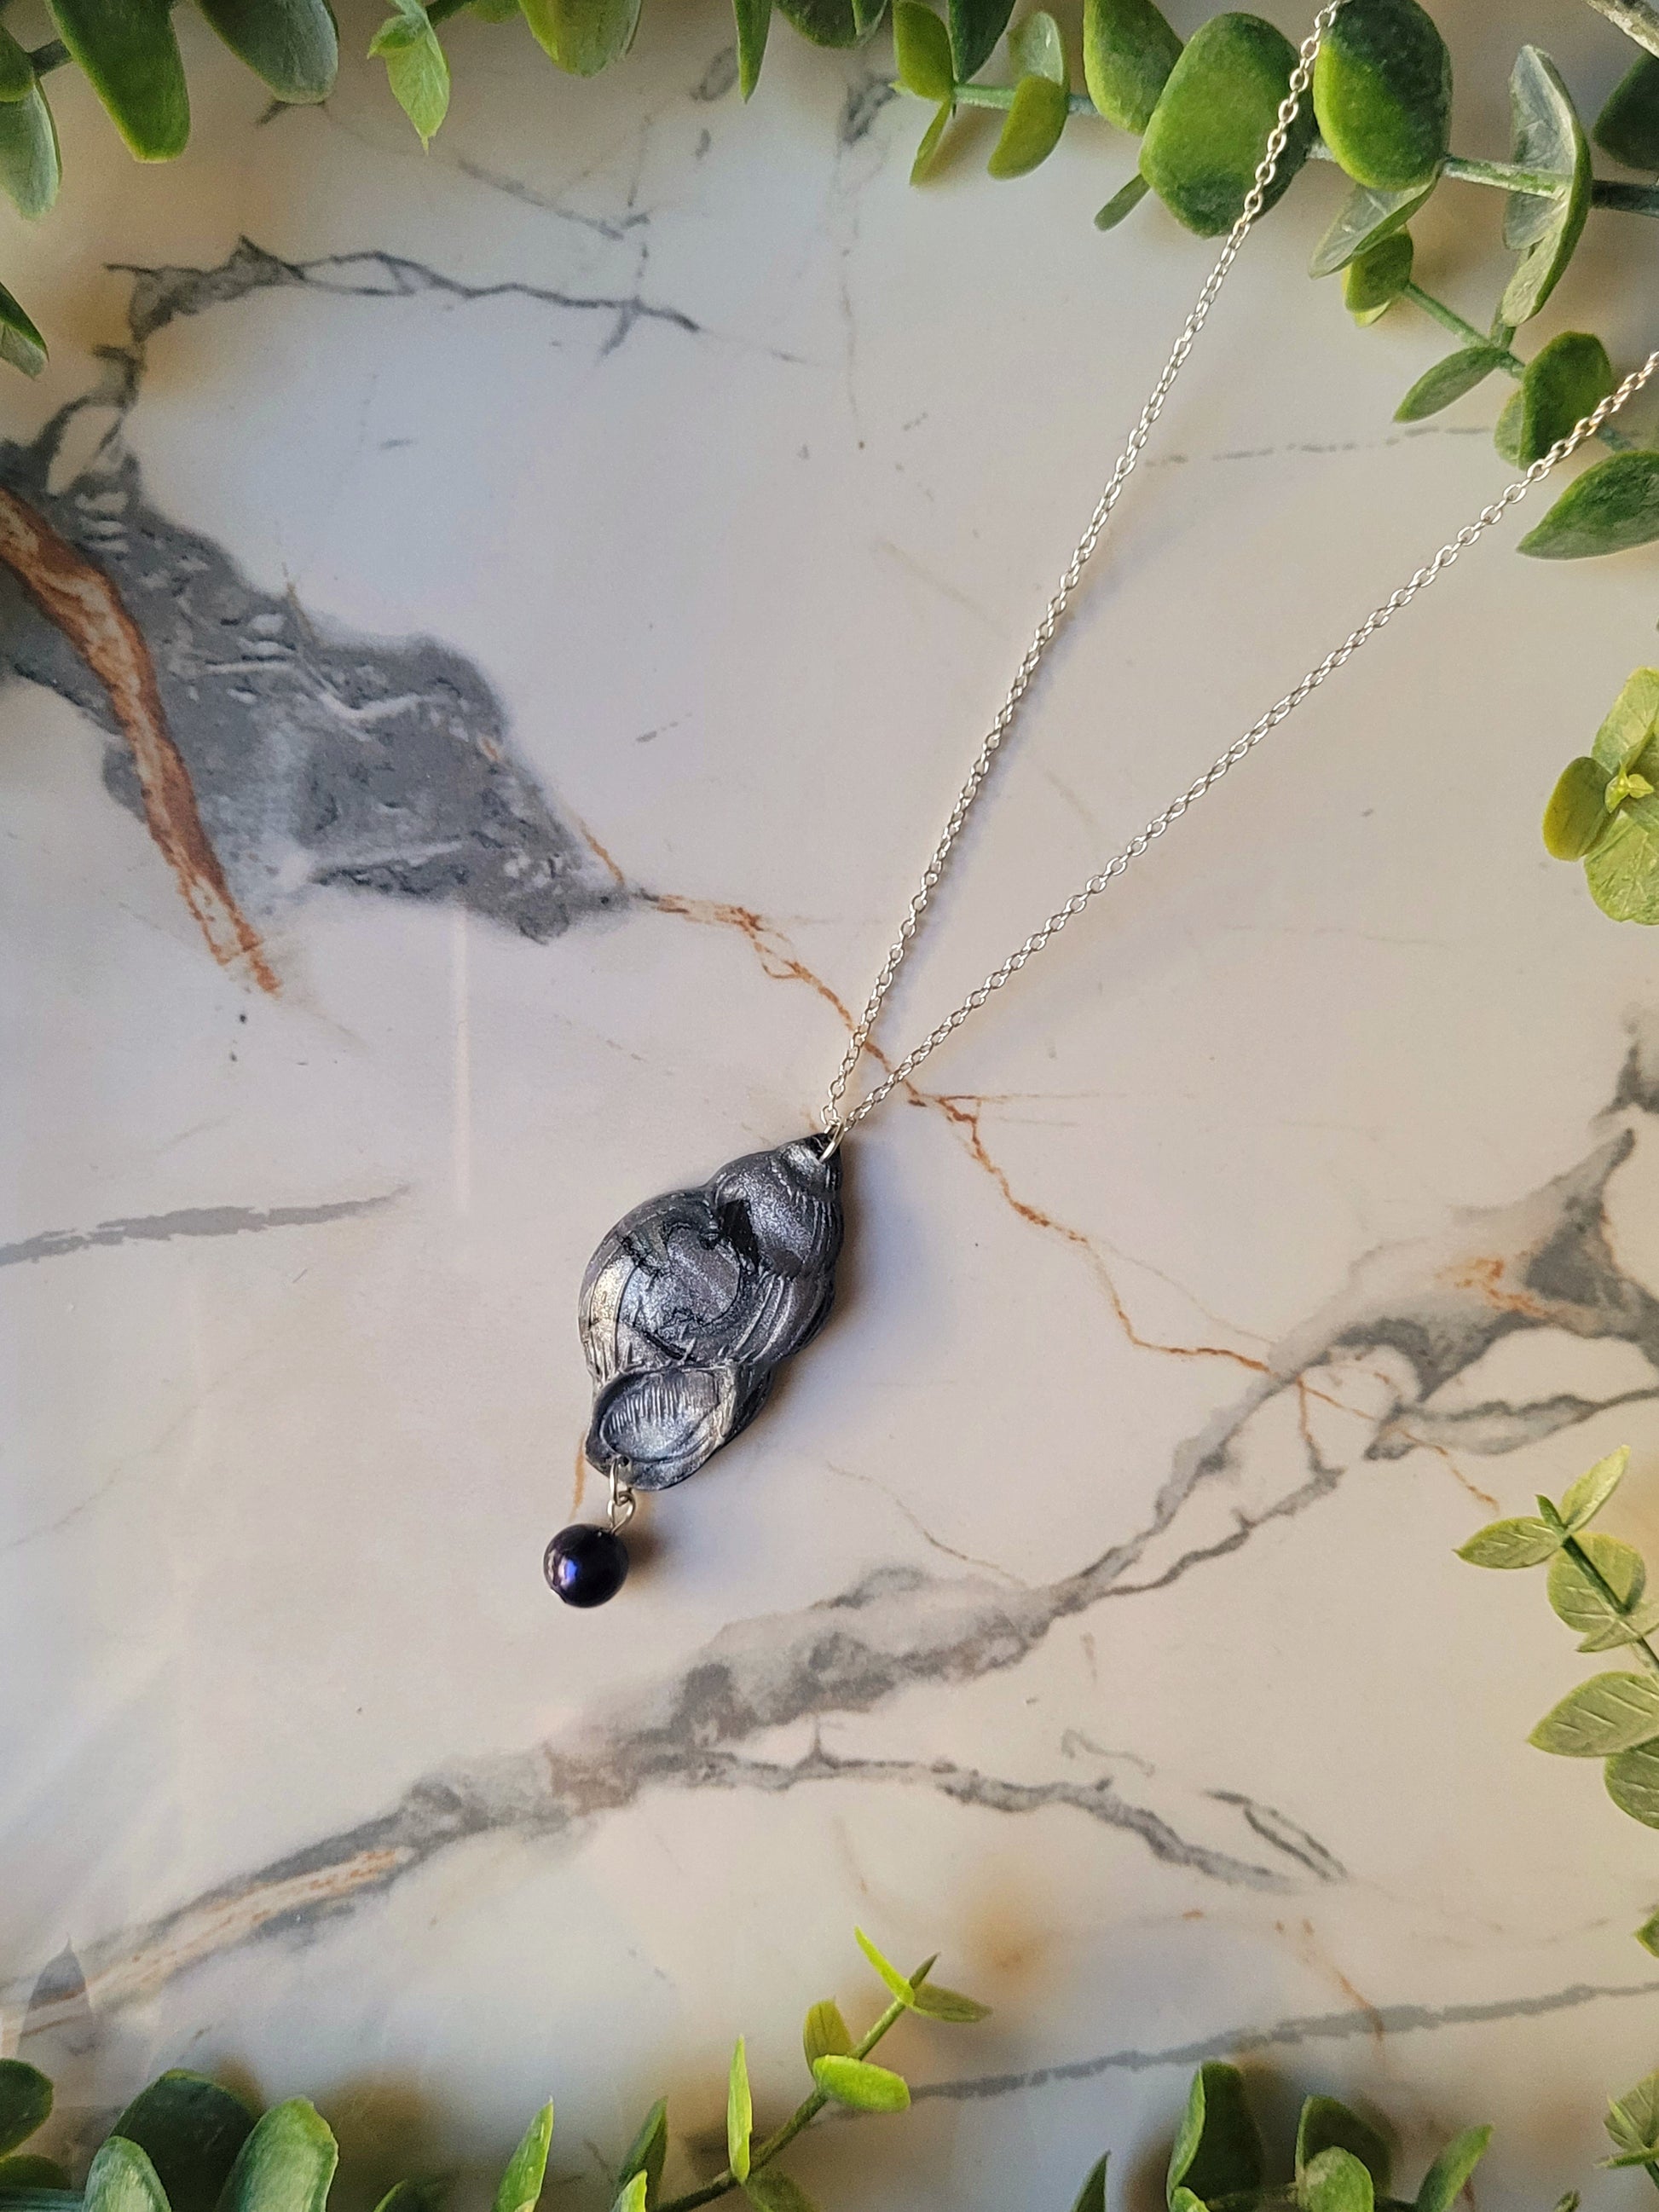 close up Dark silver conch shell with a black pearl necklace on a marble background surrounded by foliage.